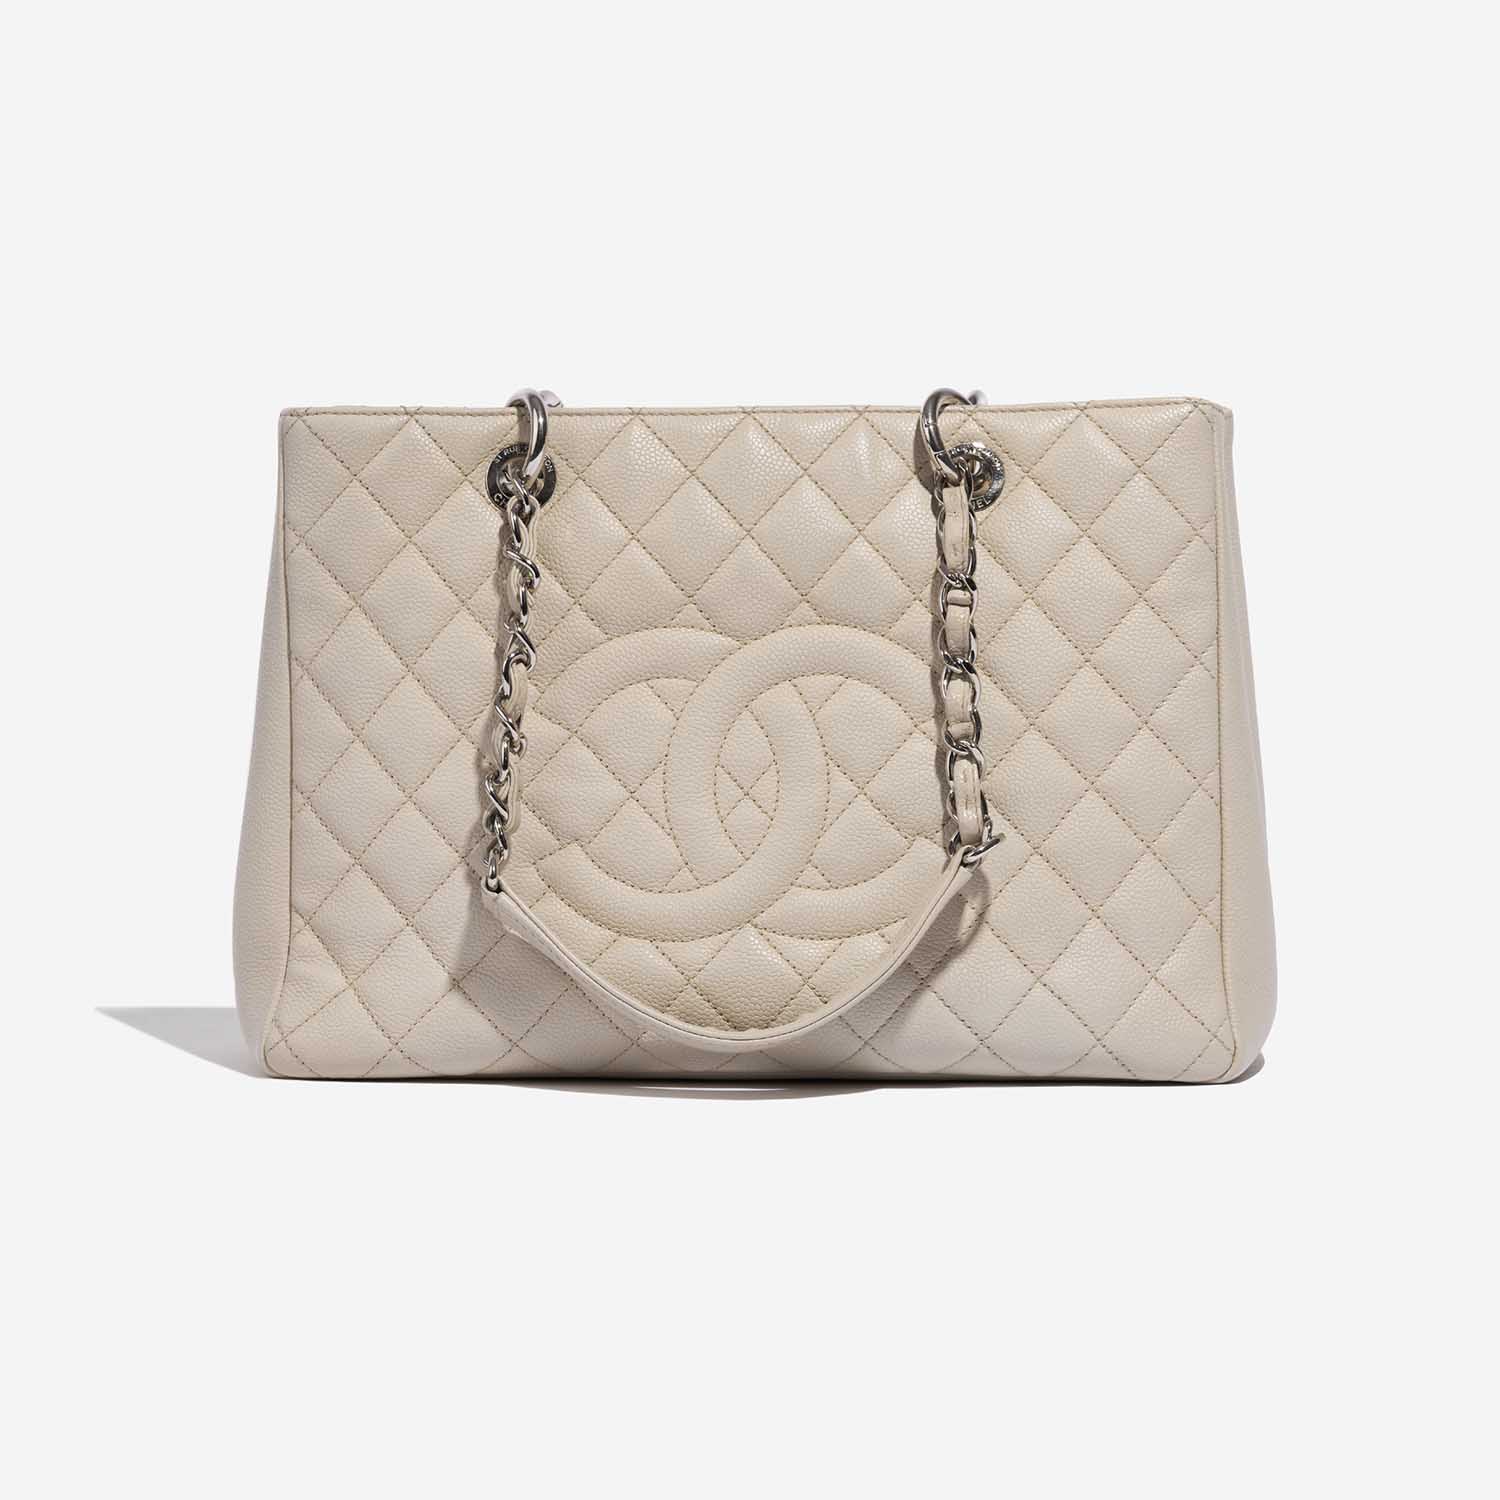 Chanel  Glampot  Authentic Preloved and Brand New Bags and Accessories